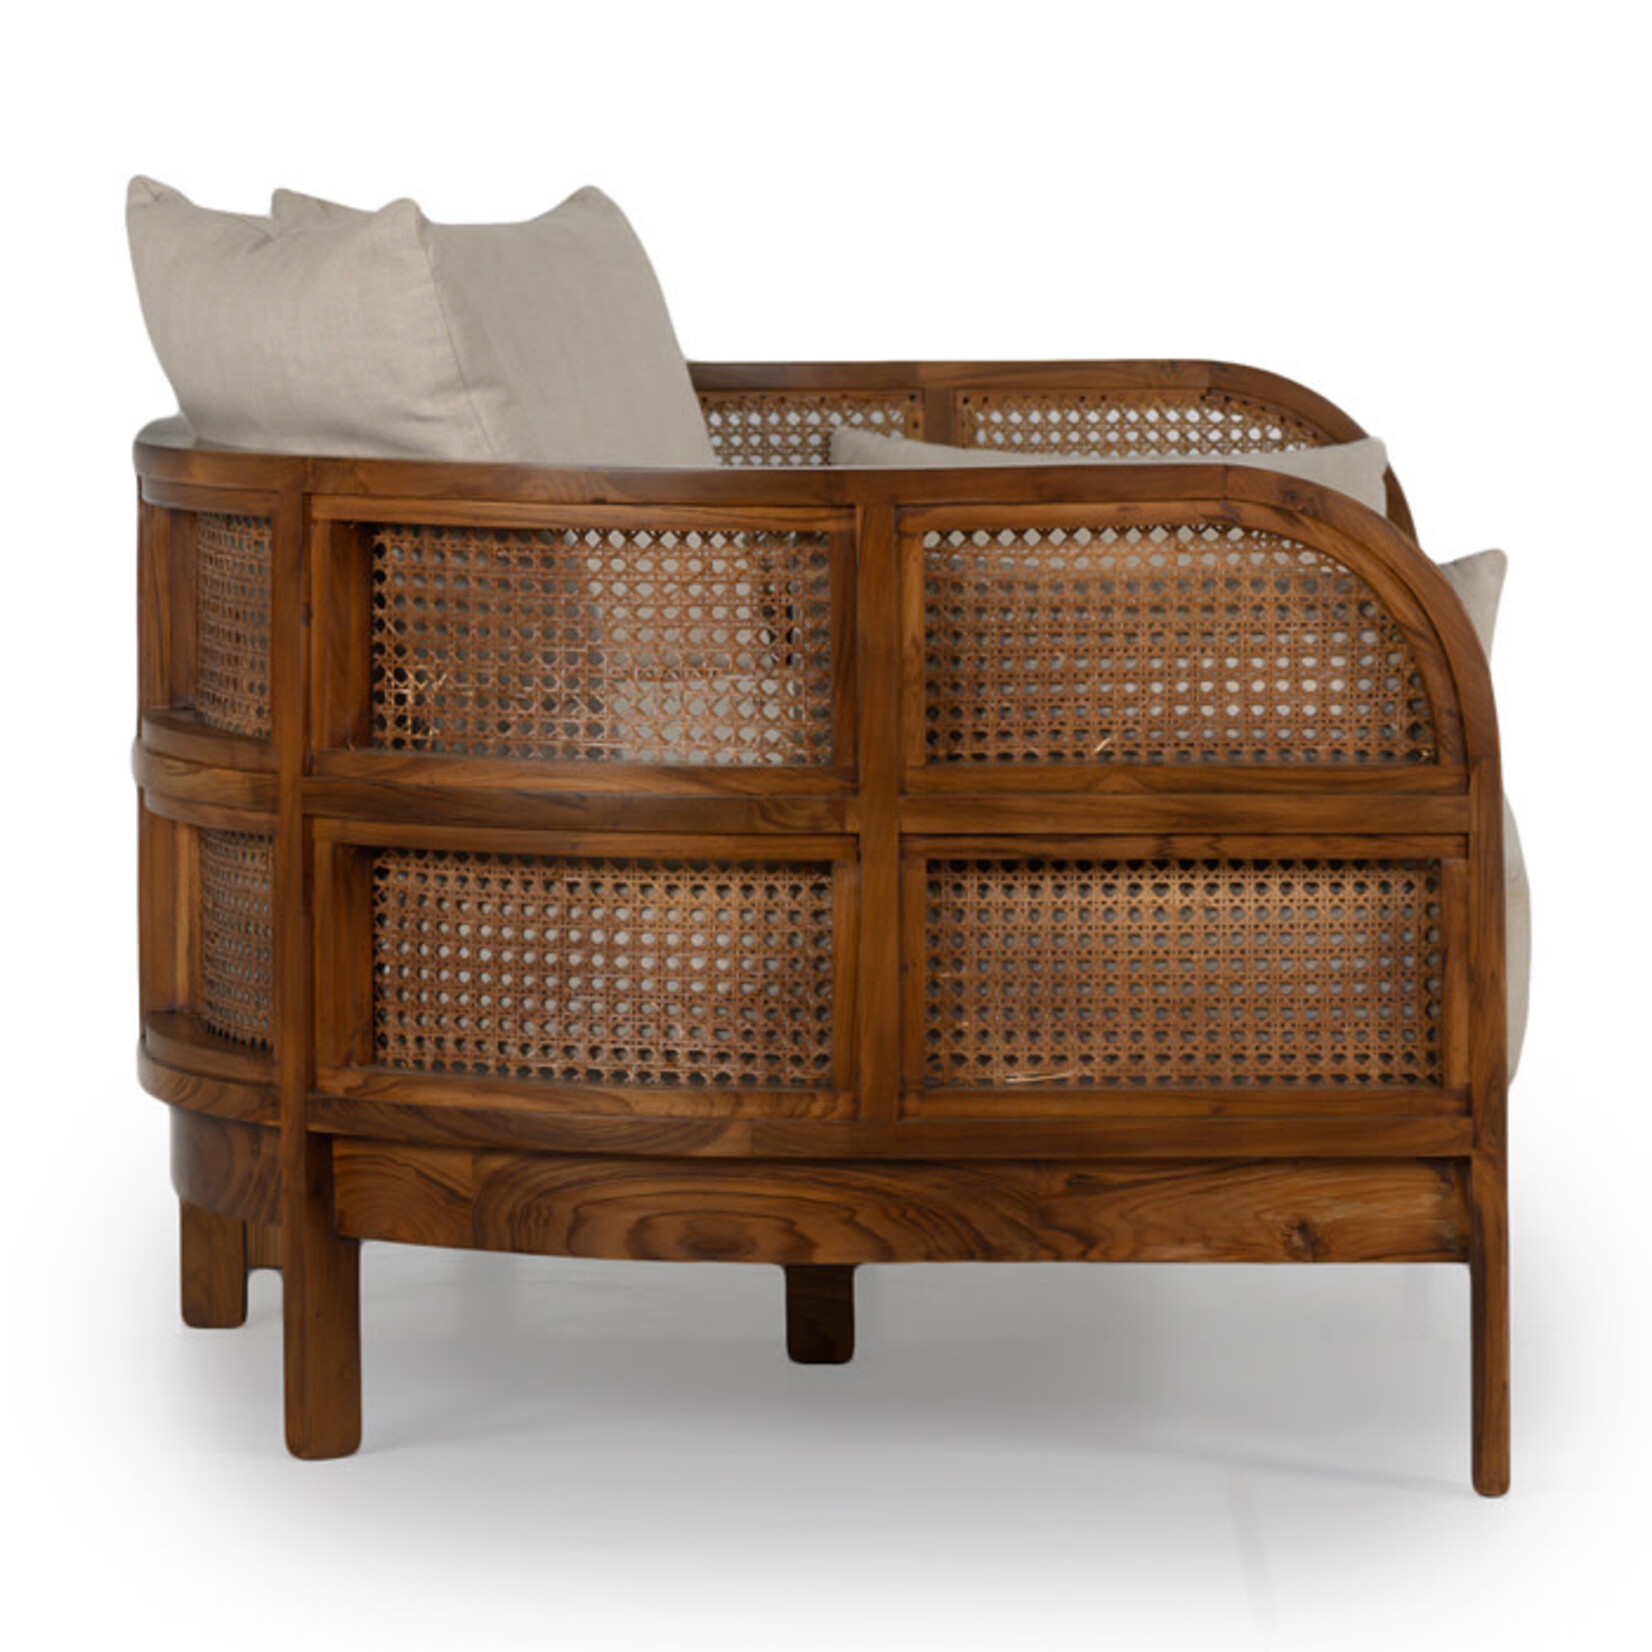 Union Home LLC Nest Daybed Hand Woven Rattan